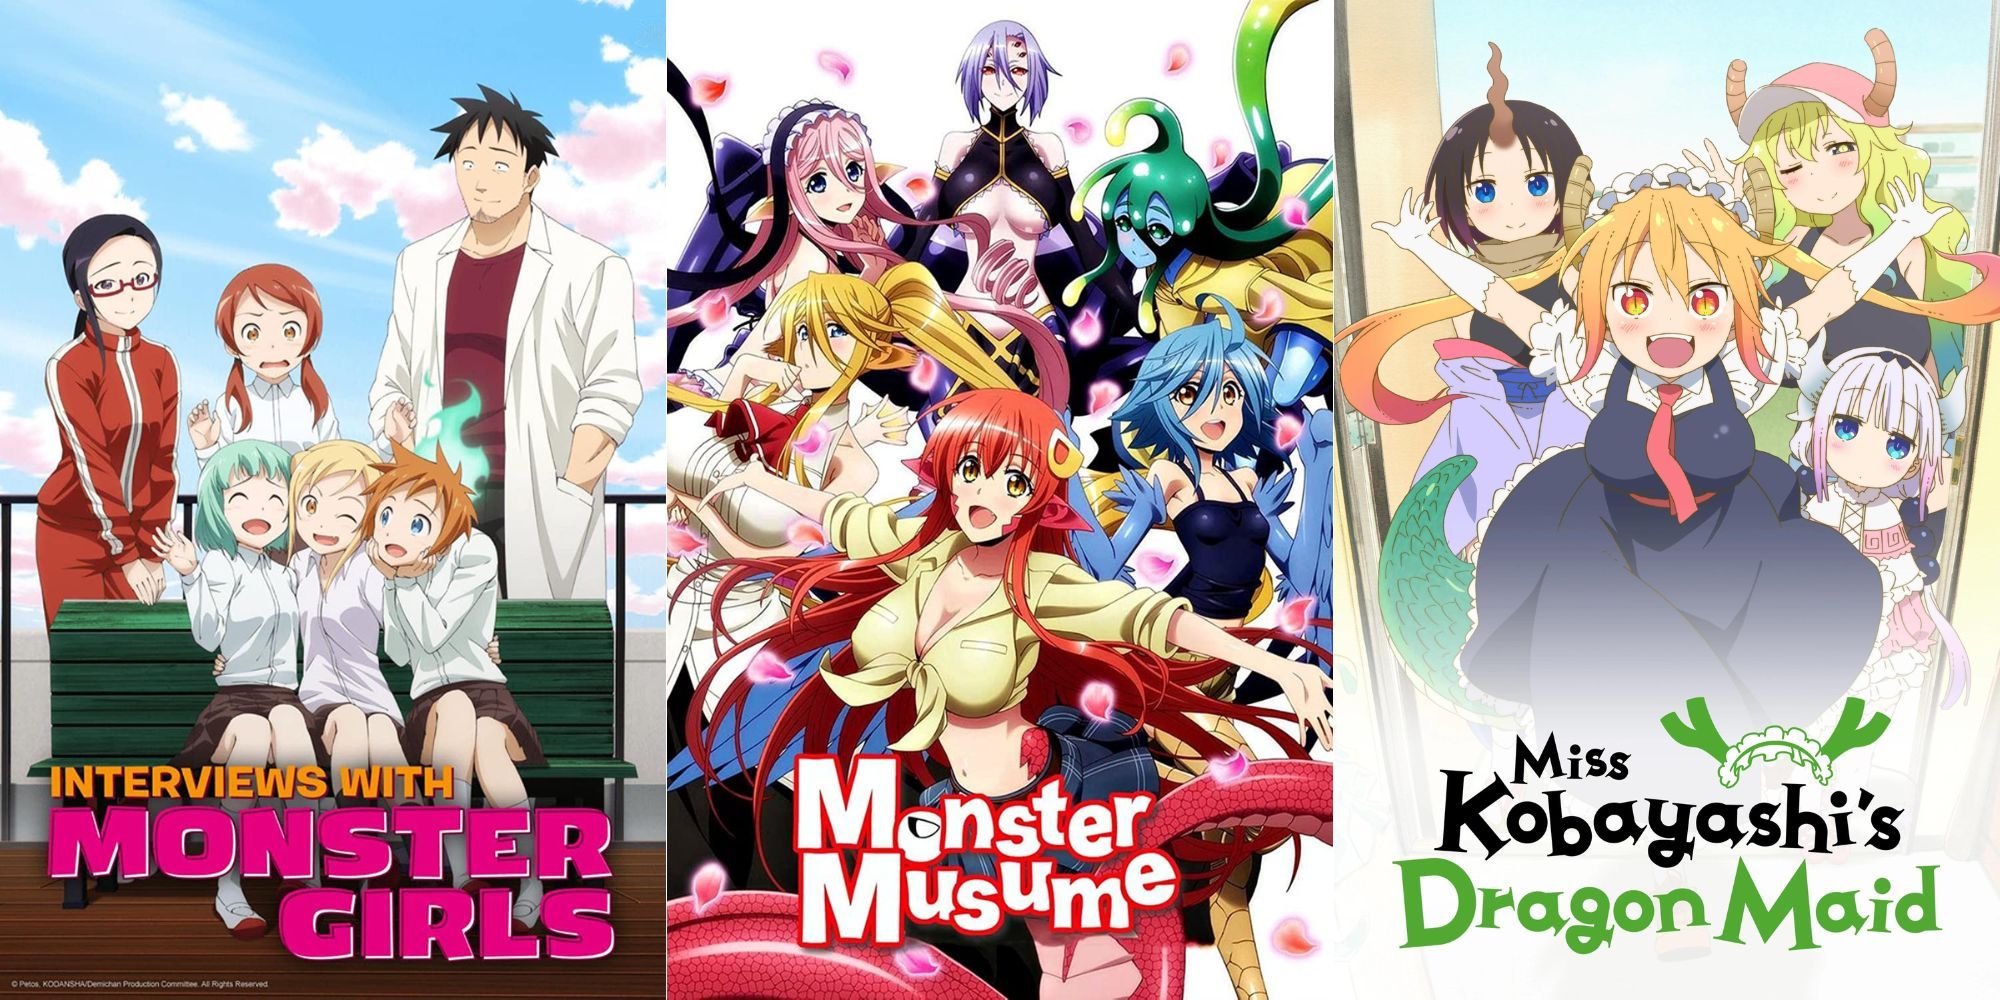 Interviews with Monster Girls, Monster Musume, & Miss Kobyashi's Dragon Maid